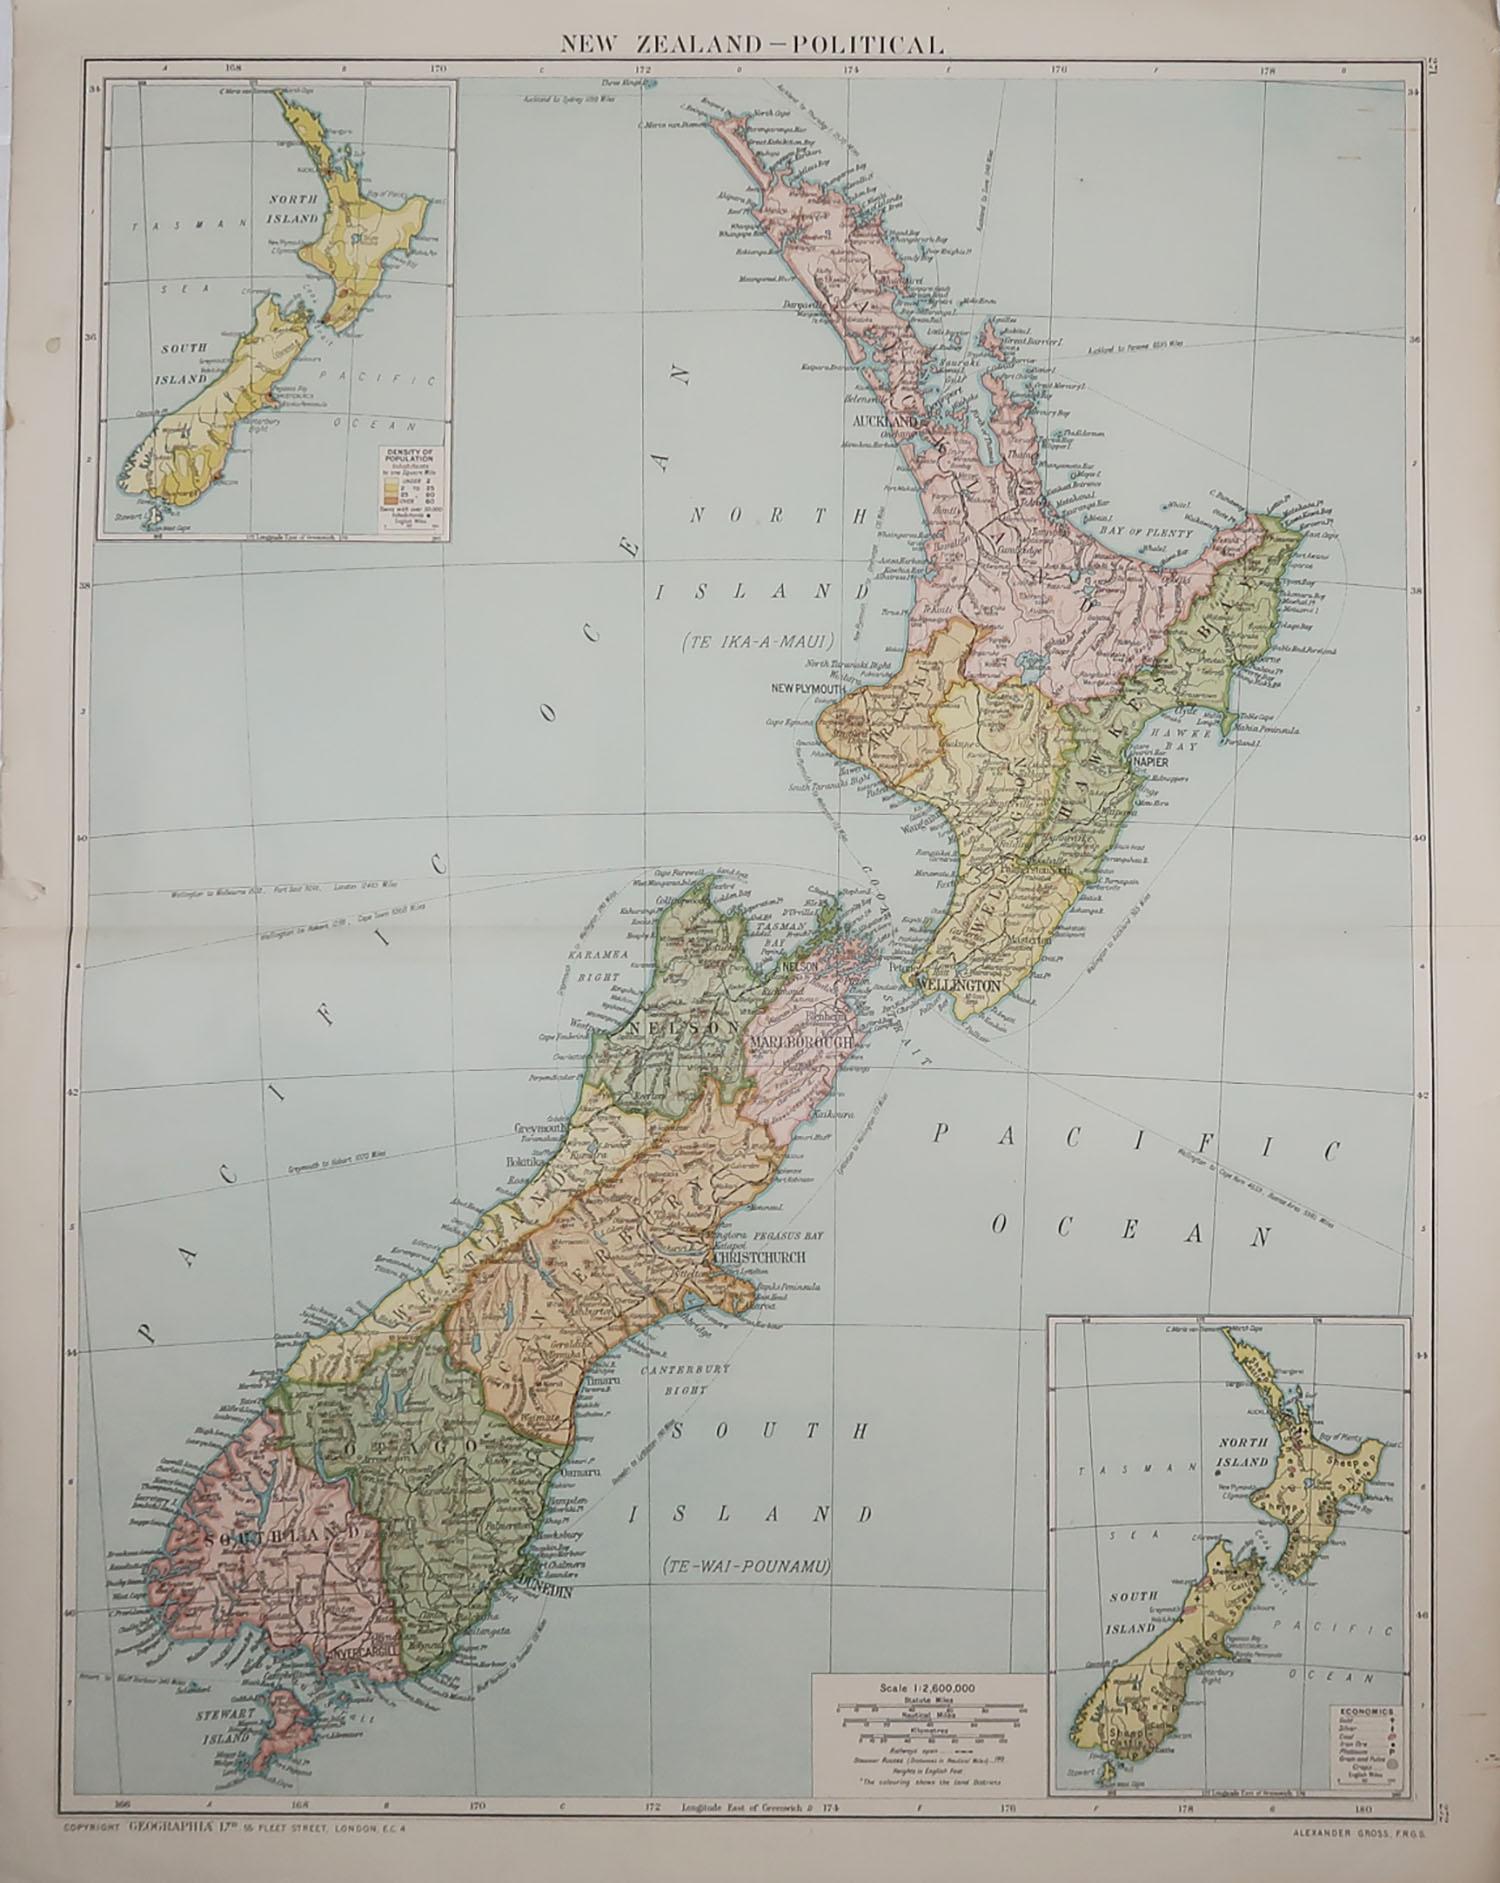 Great map of New Zealand

Original color. 

Published by Alexander Gross

Repairs to a couple of minor edge tears

Unframed.








 